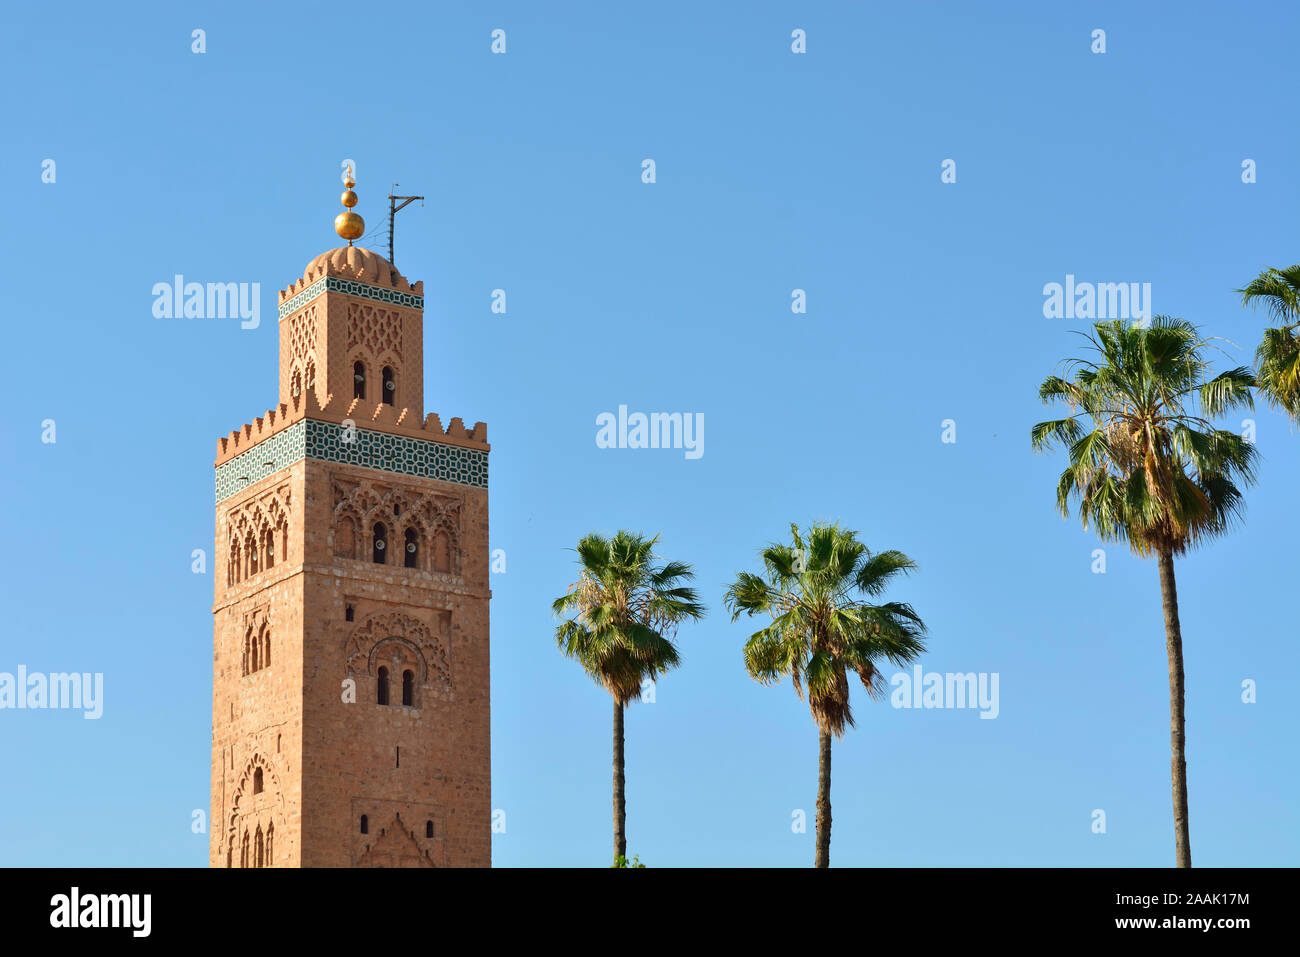 The Koutoubia minaret, 77 metres (253 ft) in height. It was completed under the reign of the Almohad Caliph Yaqub al-Mansur. Marrakech, Morocco Stock Photo